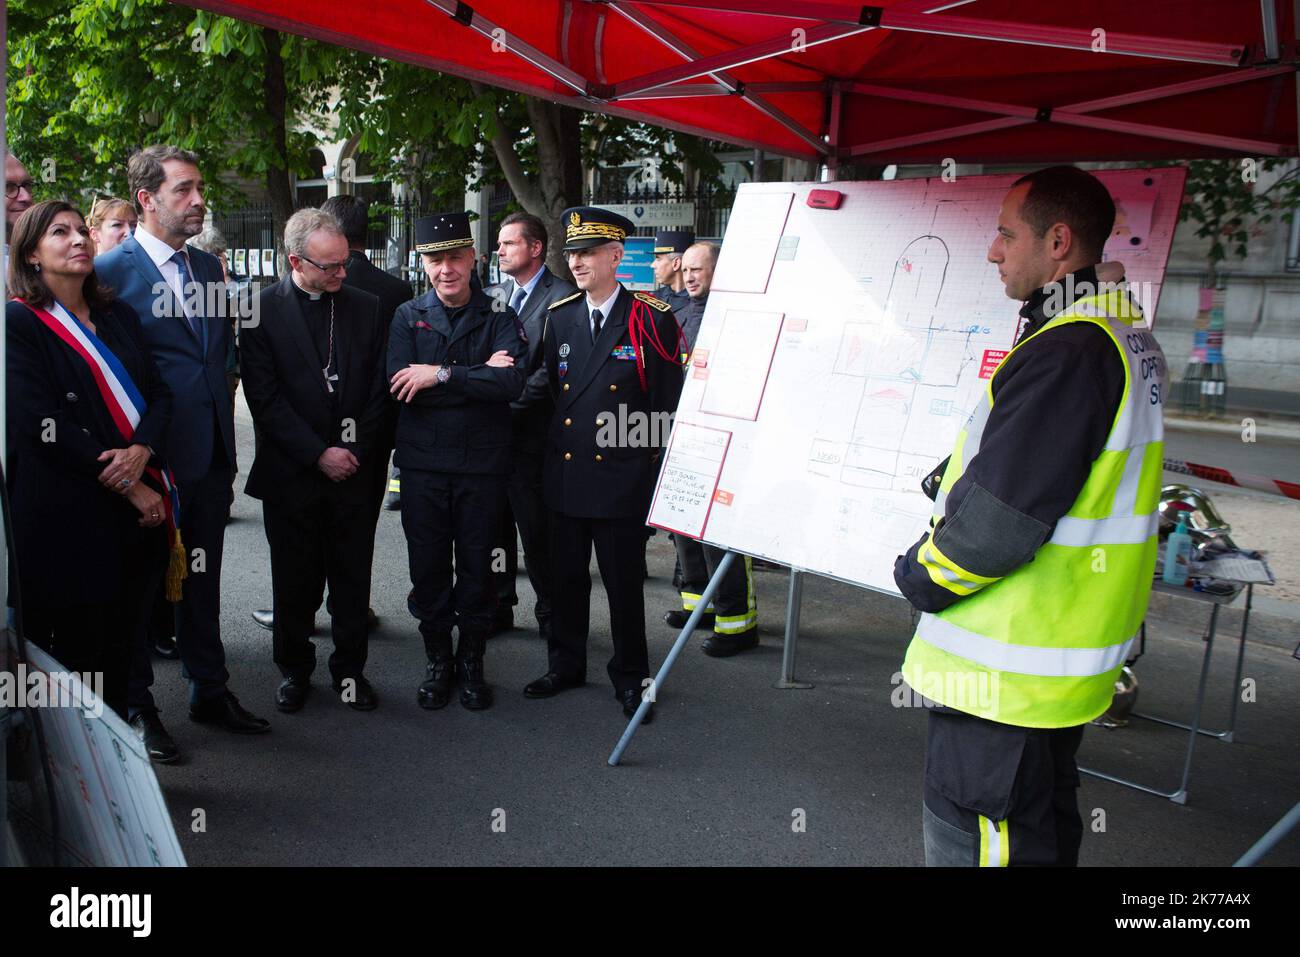 Jean-Claude Gallet General of the fire fighters of paris, Jean-Marc Chauve, French Interior Minister Christophe Castaner, Paris prefect Didier Lallement, Paris mayor Anne Hidalgo, and other officials walk by Notre Dame cathedral on April 18, 2019 in Paris. France paid a daylong tribute on April 18, 2019 to the Paris firefighters who saved Notre Dame Cathedral from collapse, while construction workers rushed to secure an area above one of the church's famed rose-shaped windows and other vulnerable sections of the fire-damaged landmark.  Stock Photo